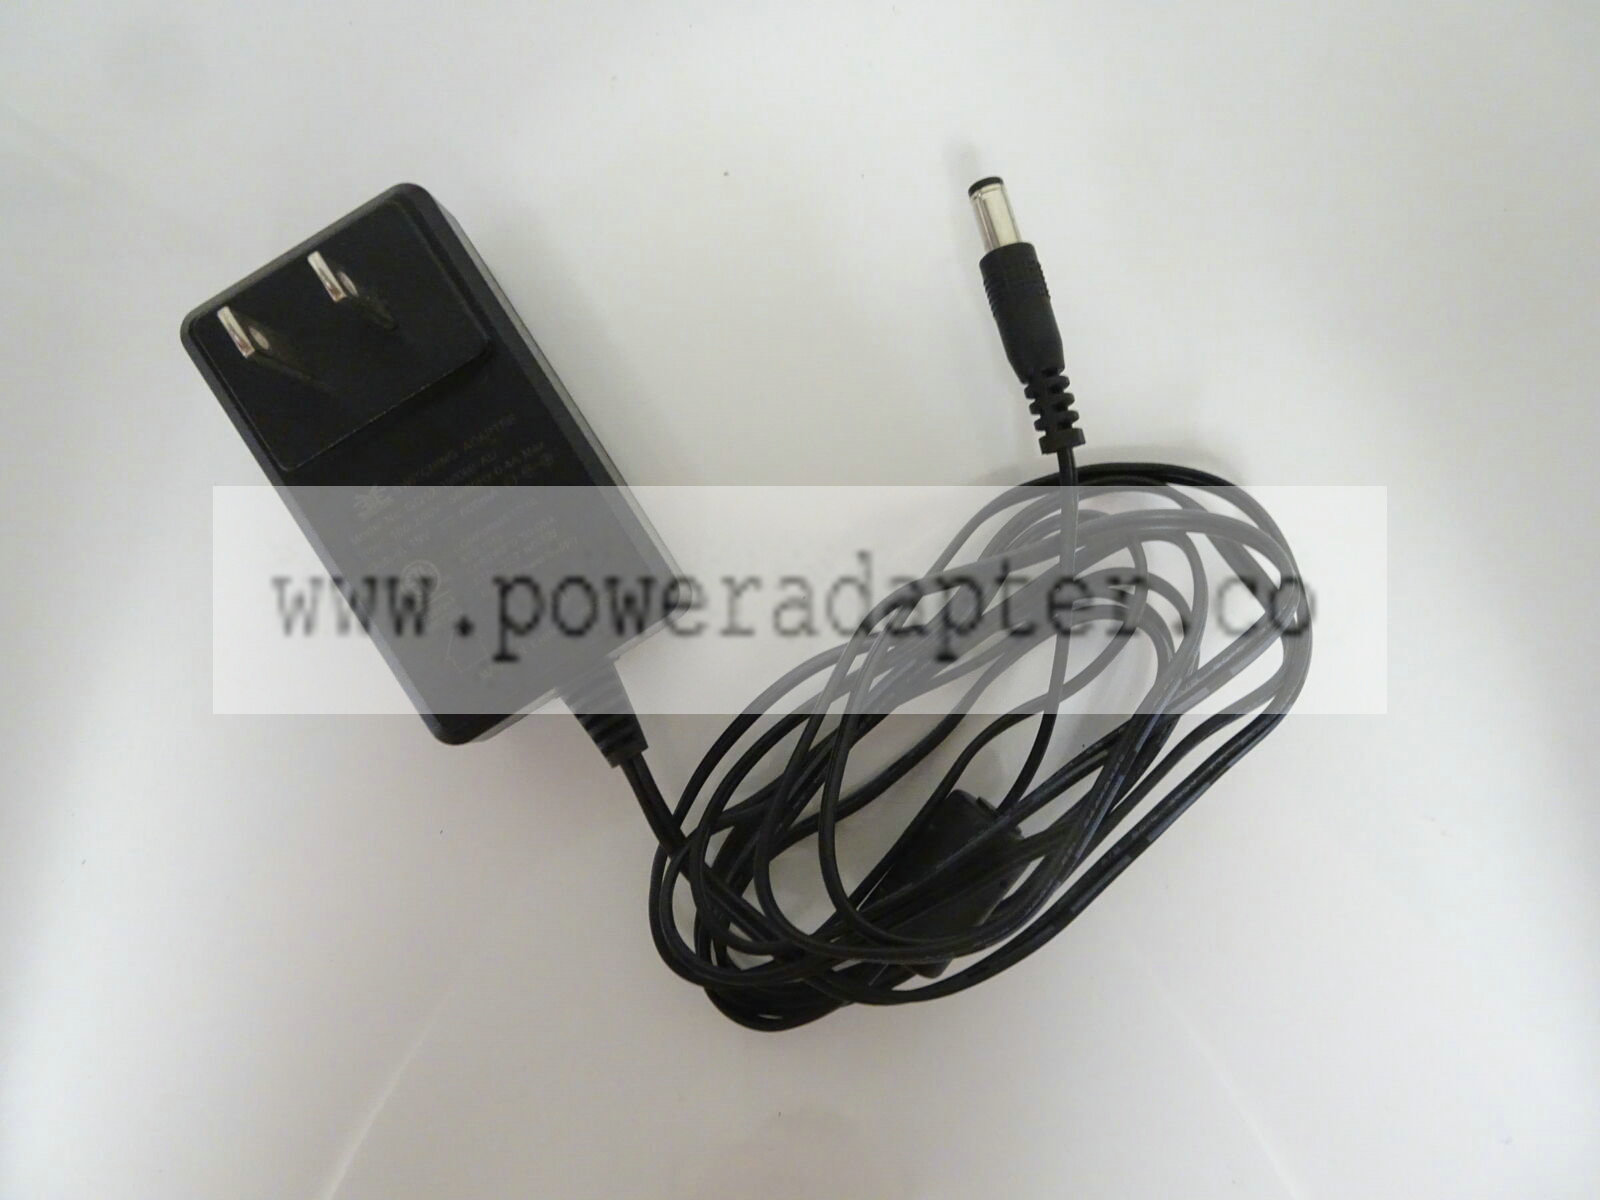 3YE 19V 600mAh Switching Adapter GQ12-190060-AU Compatible Brand: 3YE Brand: 3YE Type: Television Replacement Parts